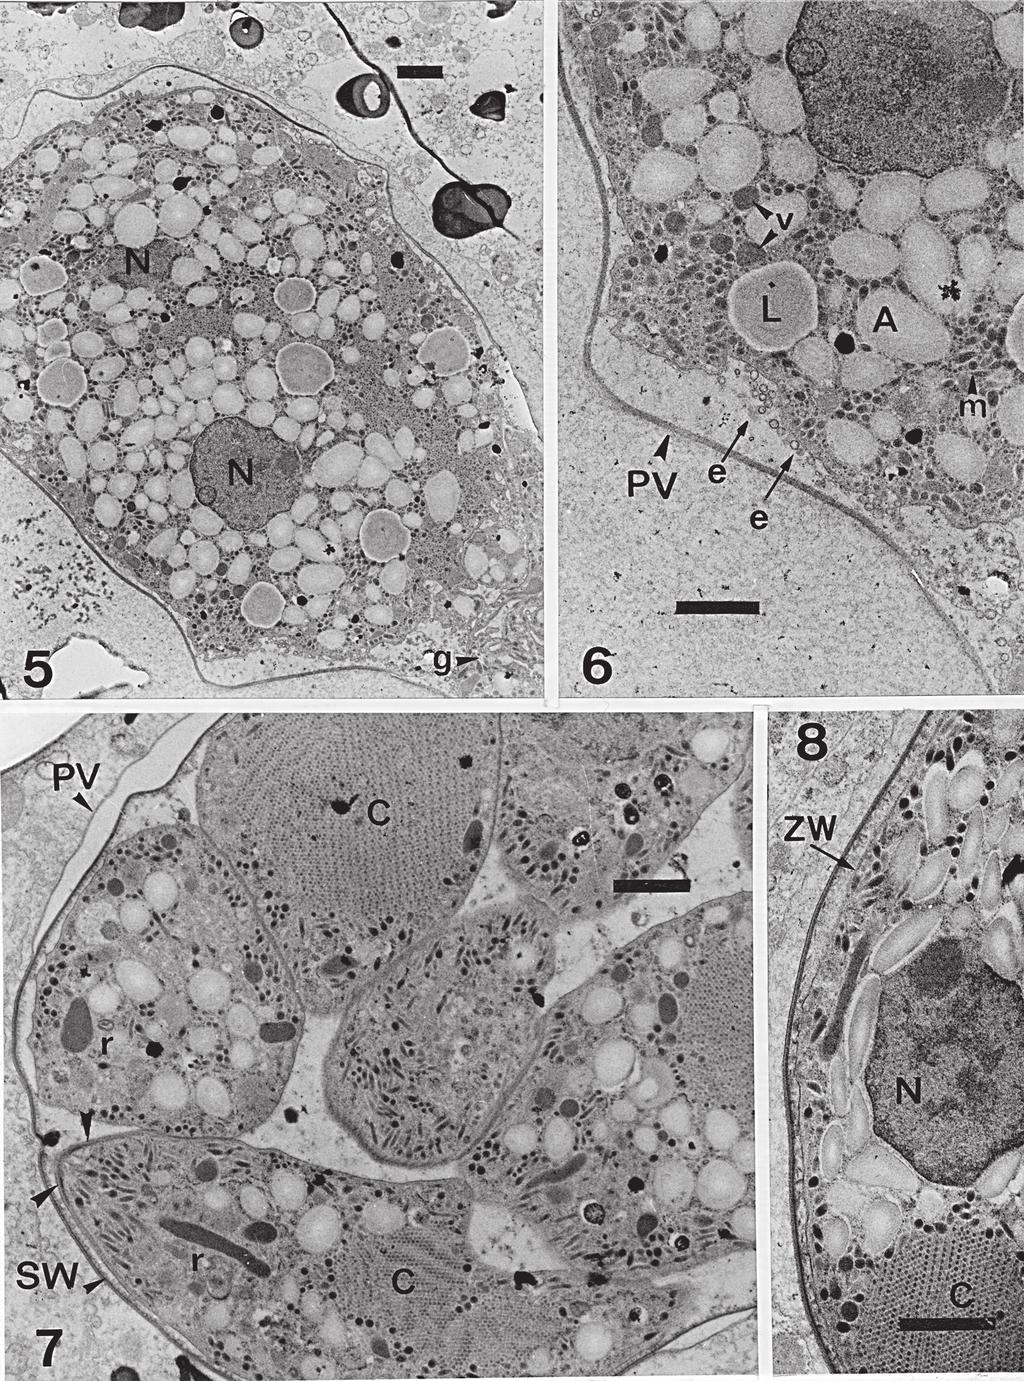 PAPERNA I. Figs 5-8. Electron micrographs of sporocysts and sporozoites of Hemolivia mauritanica from gut contents of Hyalomma aegyptium, scale bar = 1 µm. Fig. 5. Premature sporocyst (g golgi apparatus, N nucleus).